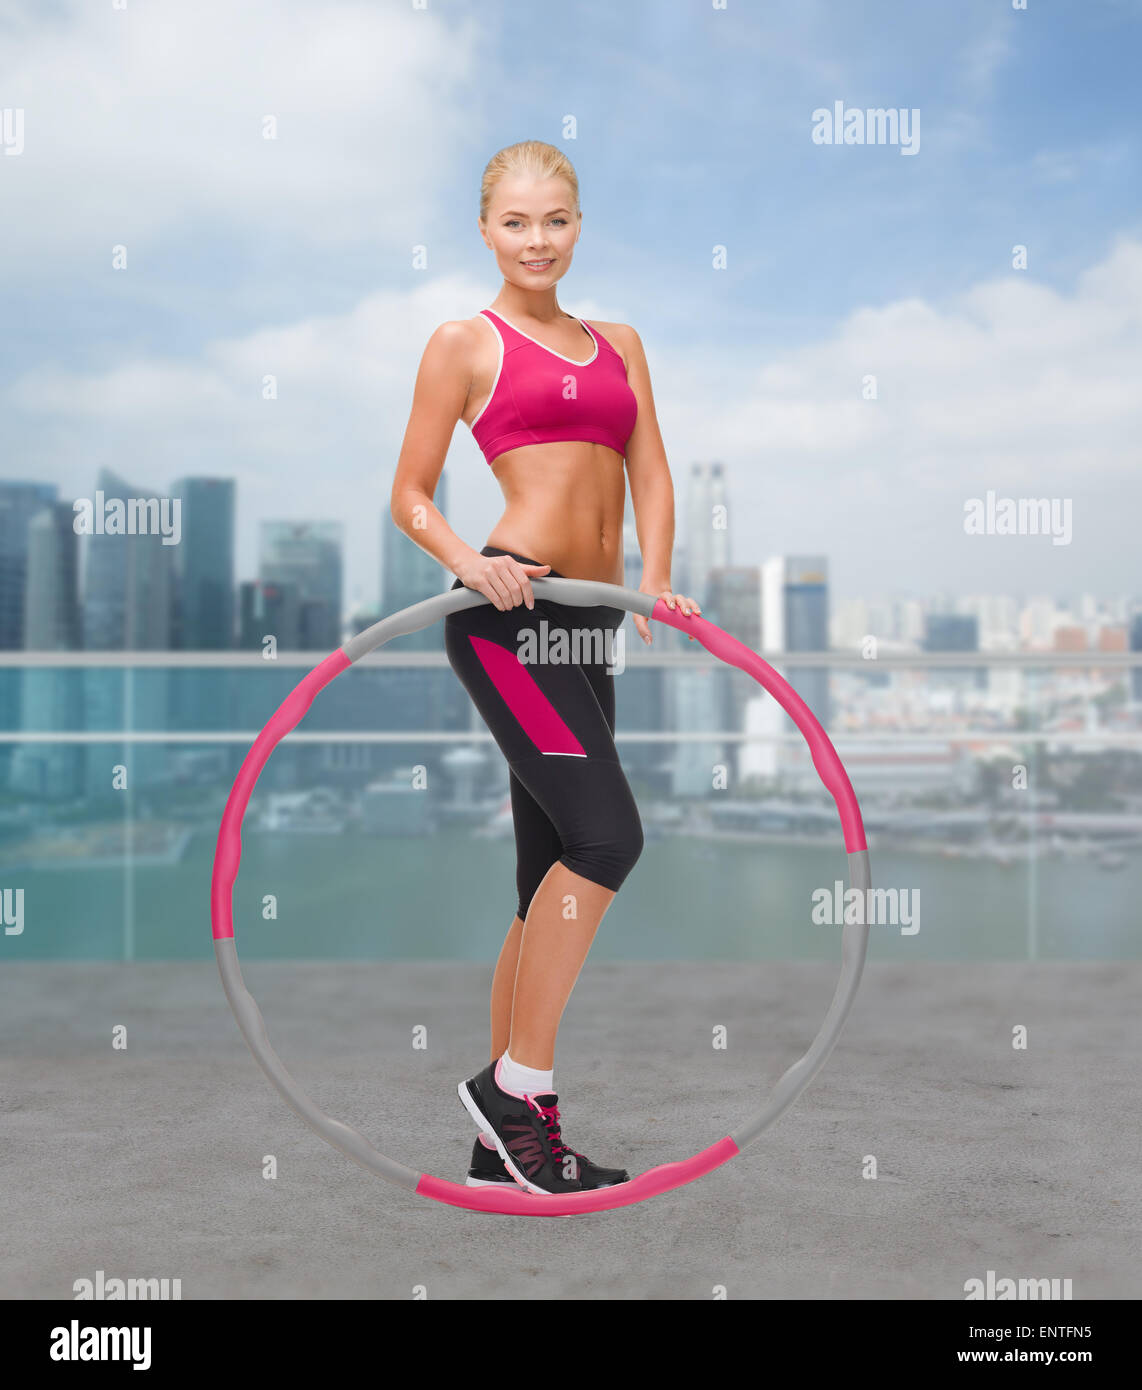 young sporty woman with hula hoop Stock Photo